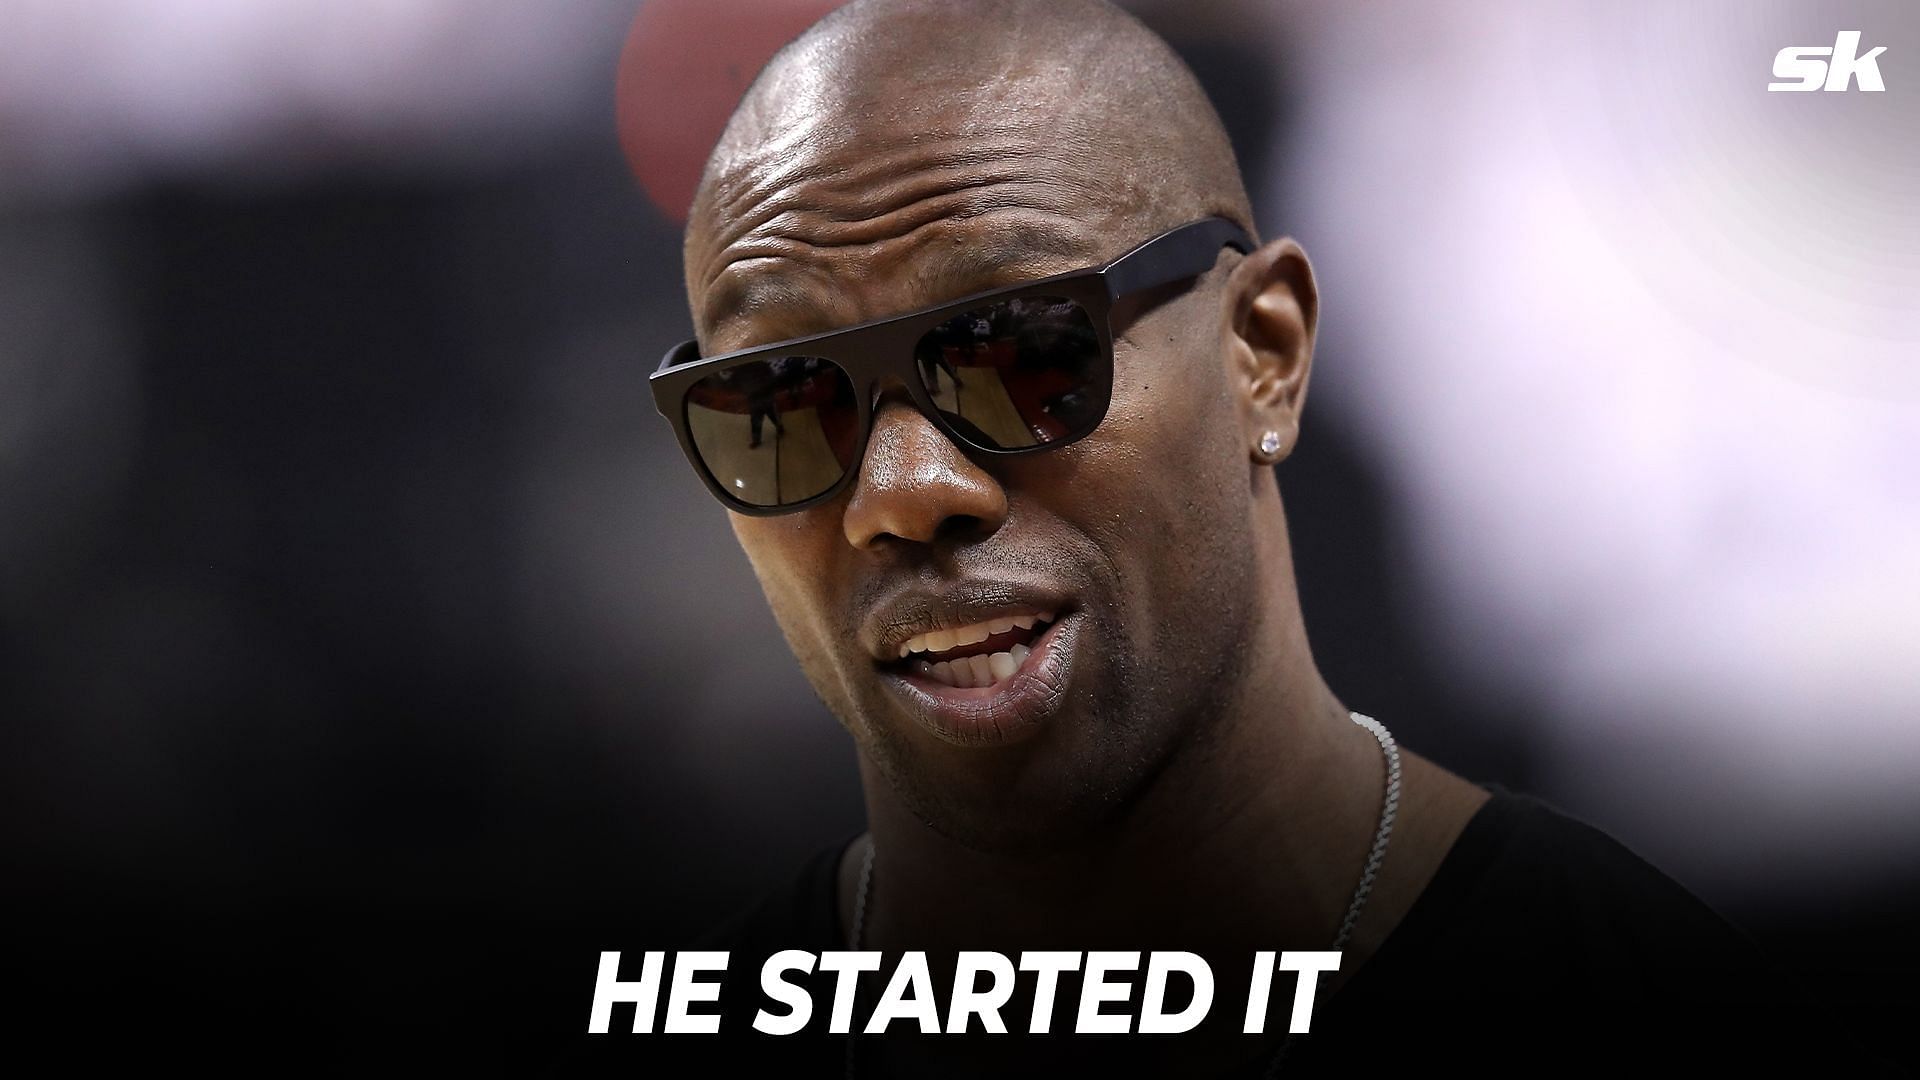 Terrell Owens claims he was stopping situation from escalating after punching heckler